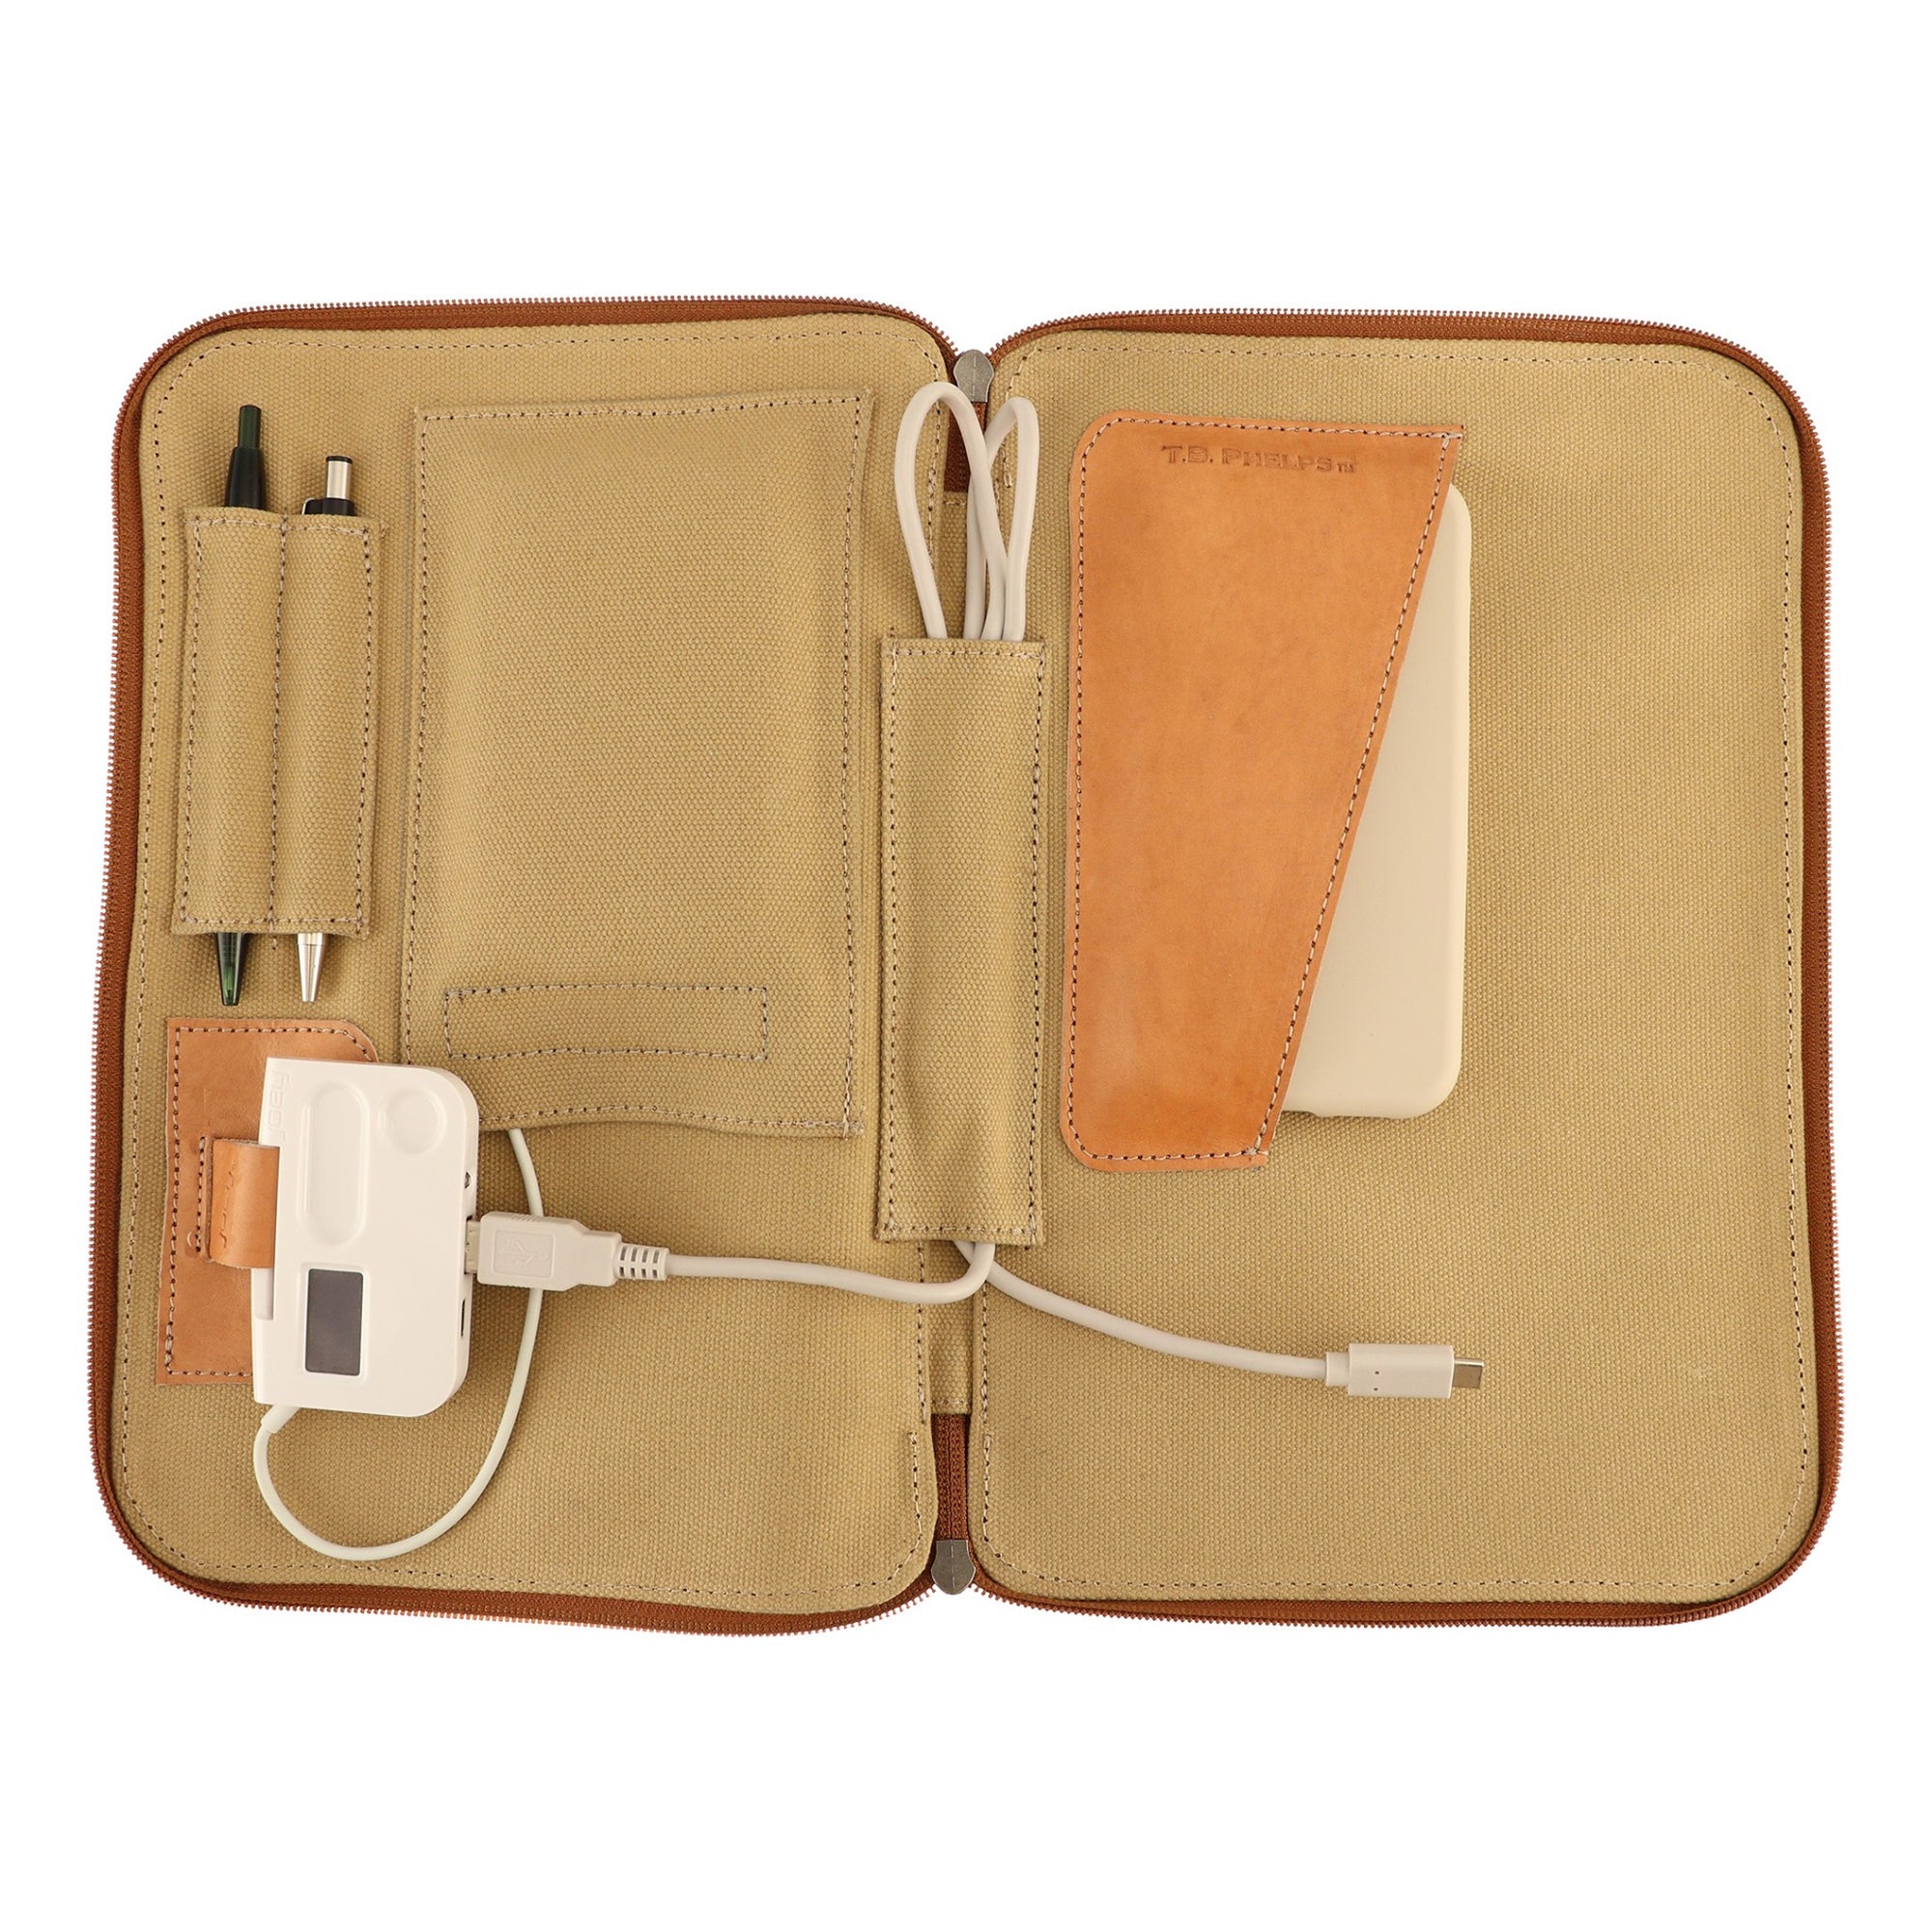 Tech Folio with JoeyEnergy® in Natural Vachetta Leather by T.B. Phelps